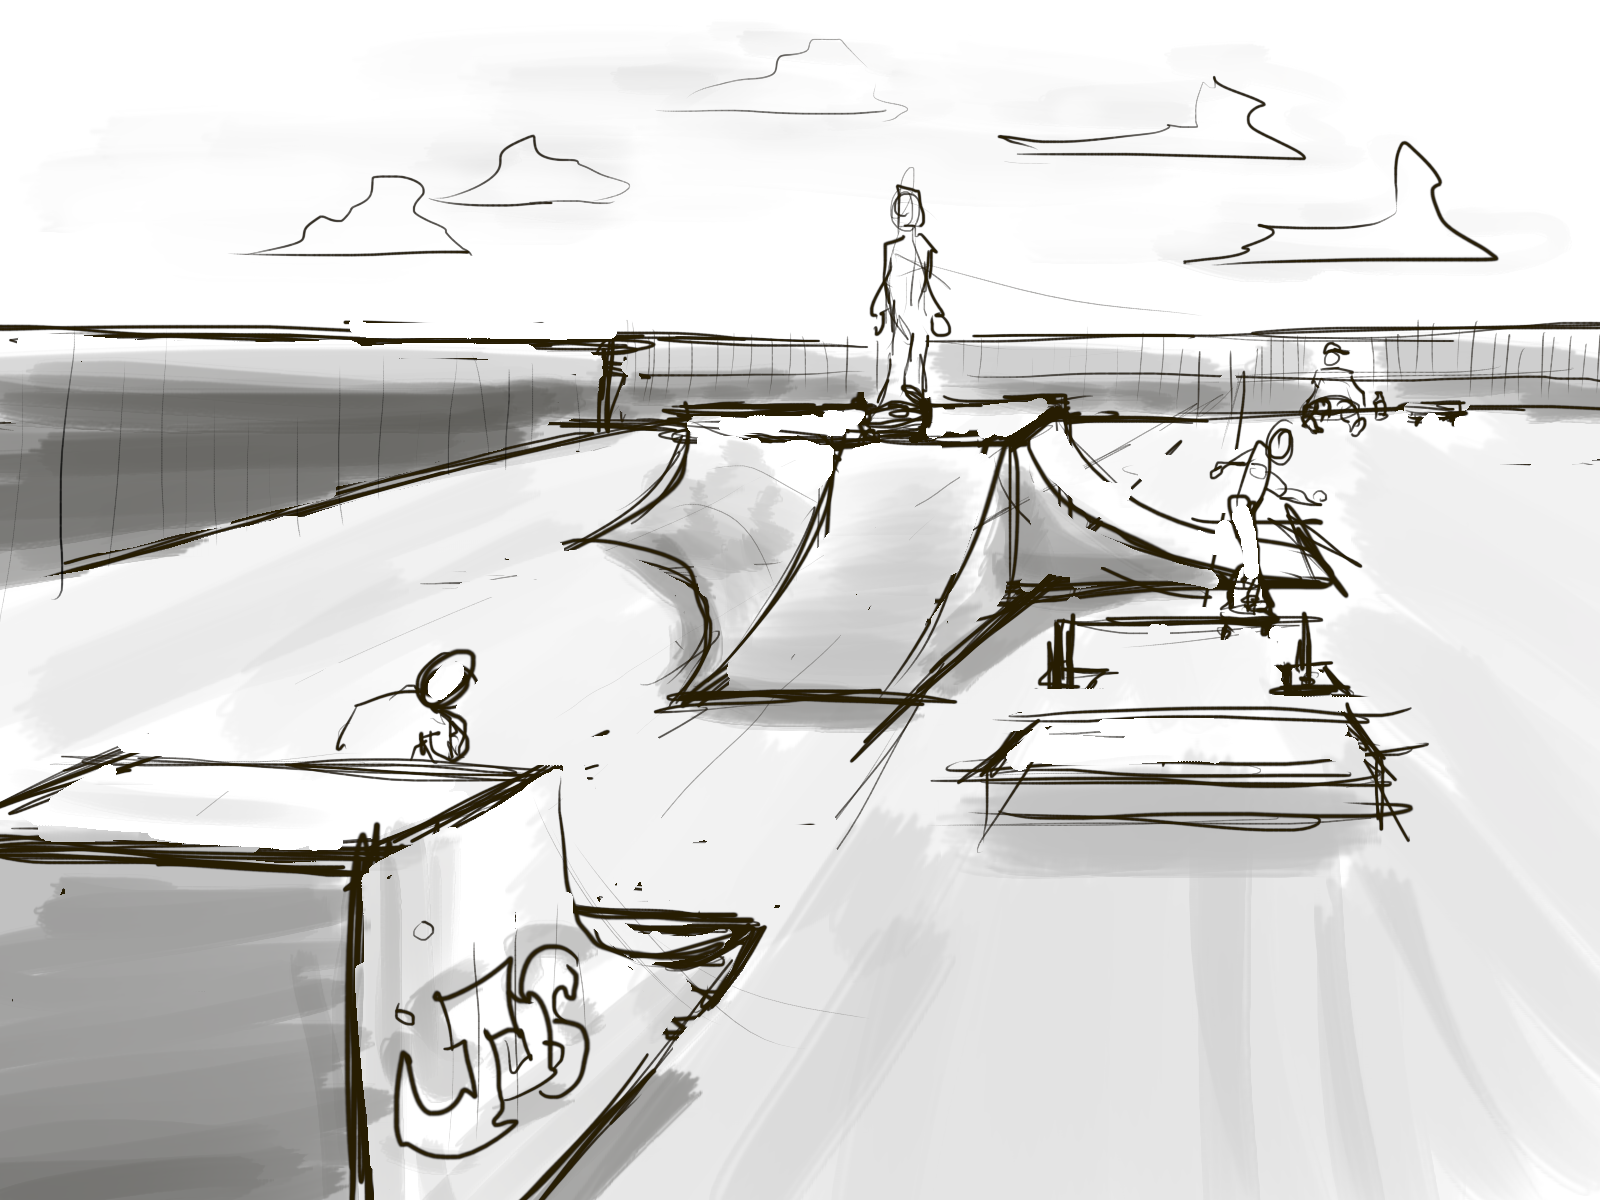 Skatepark Sketch at Explore collection of